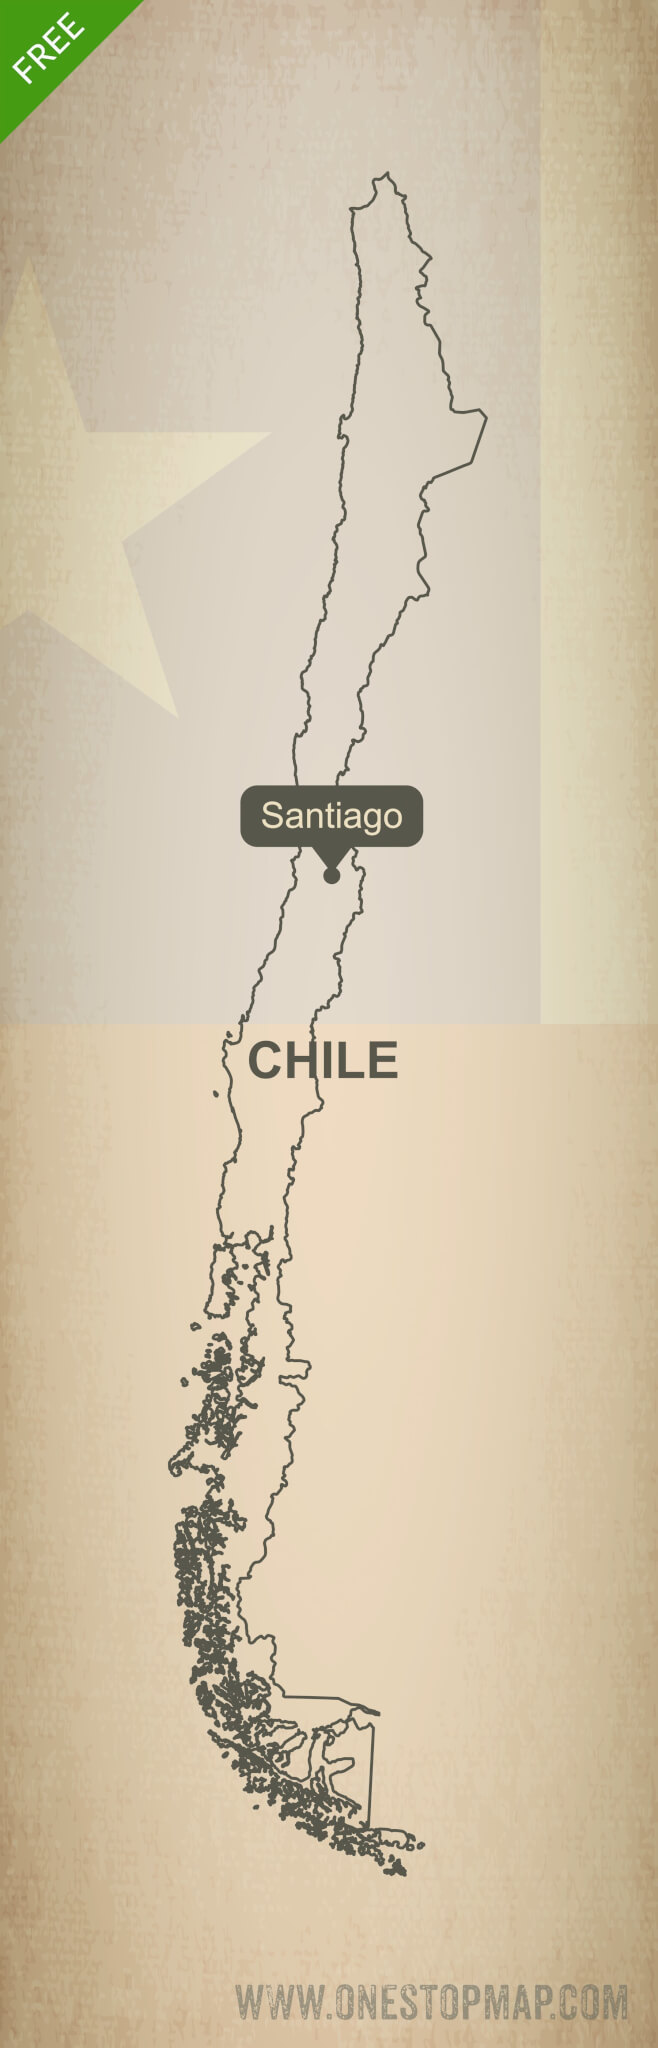 free-vector-map-of-chile-outline-one-stop-map